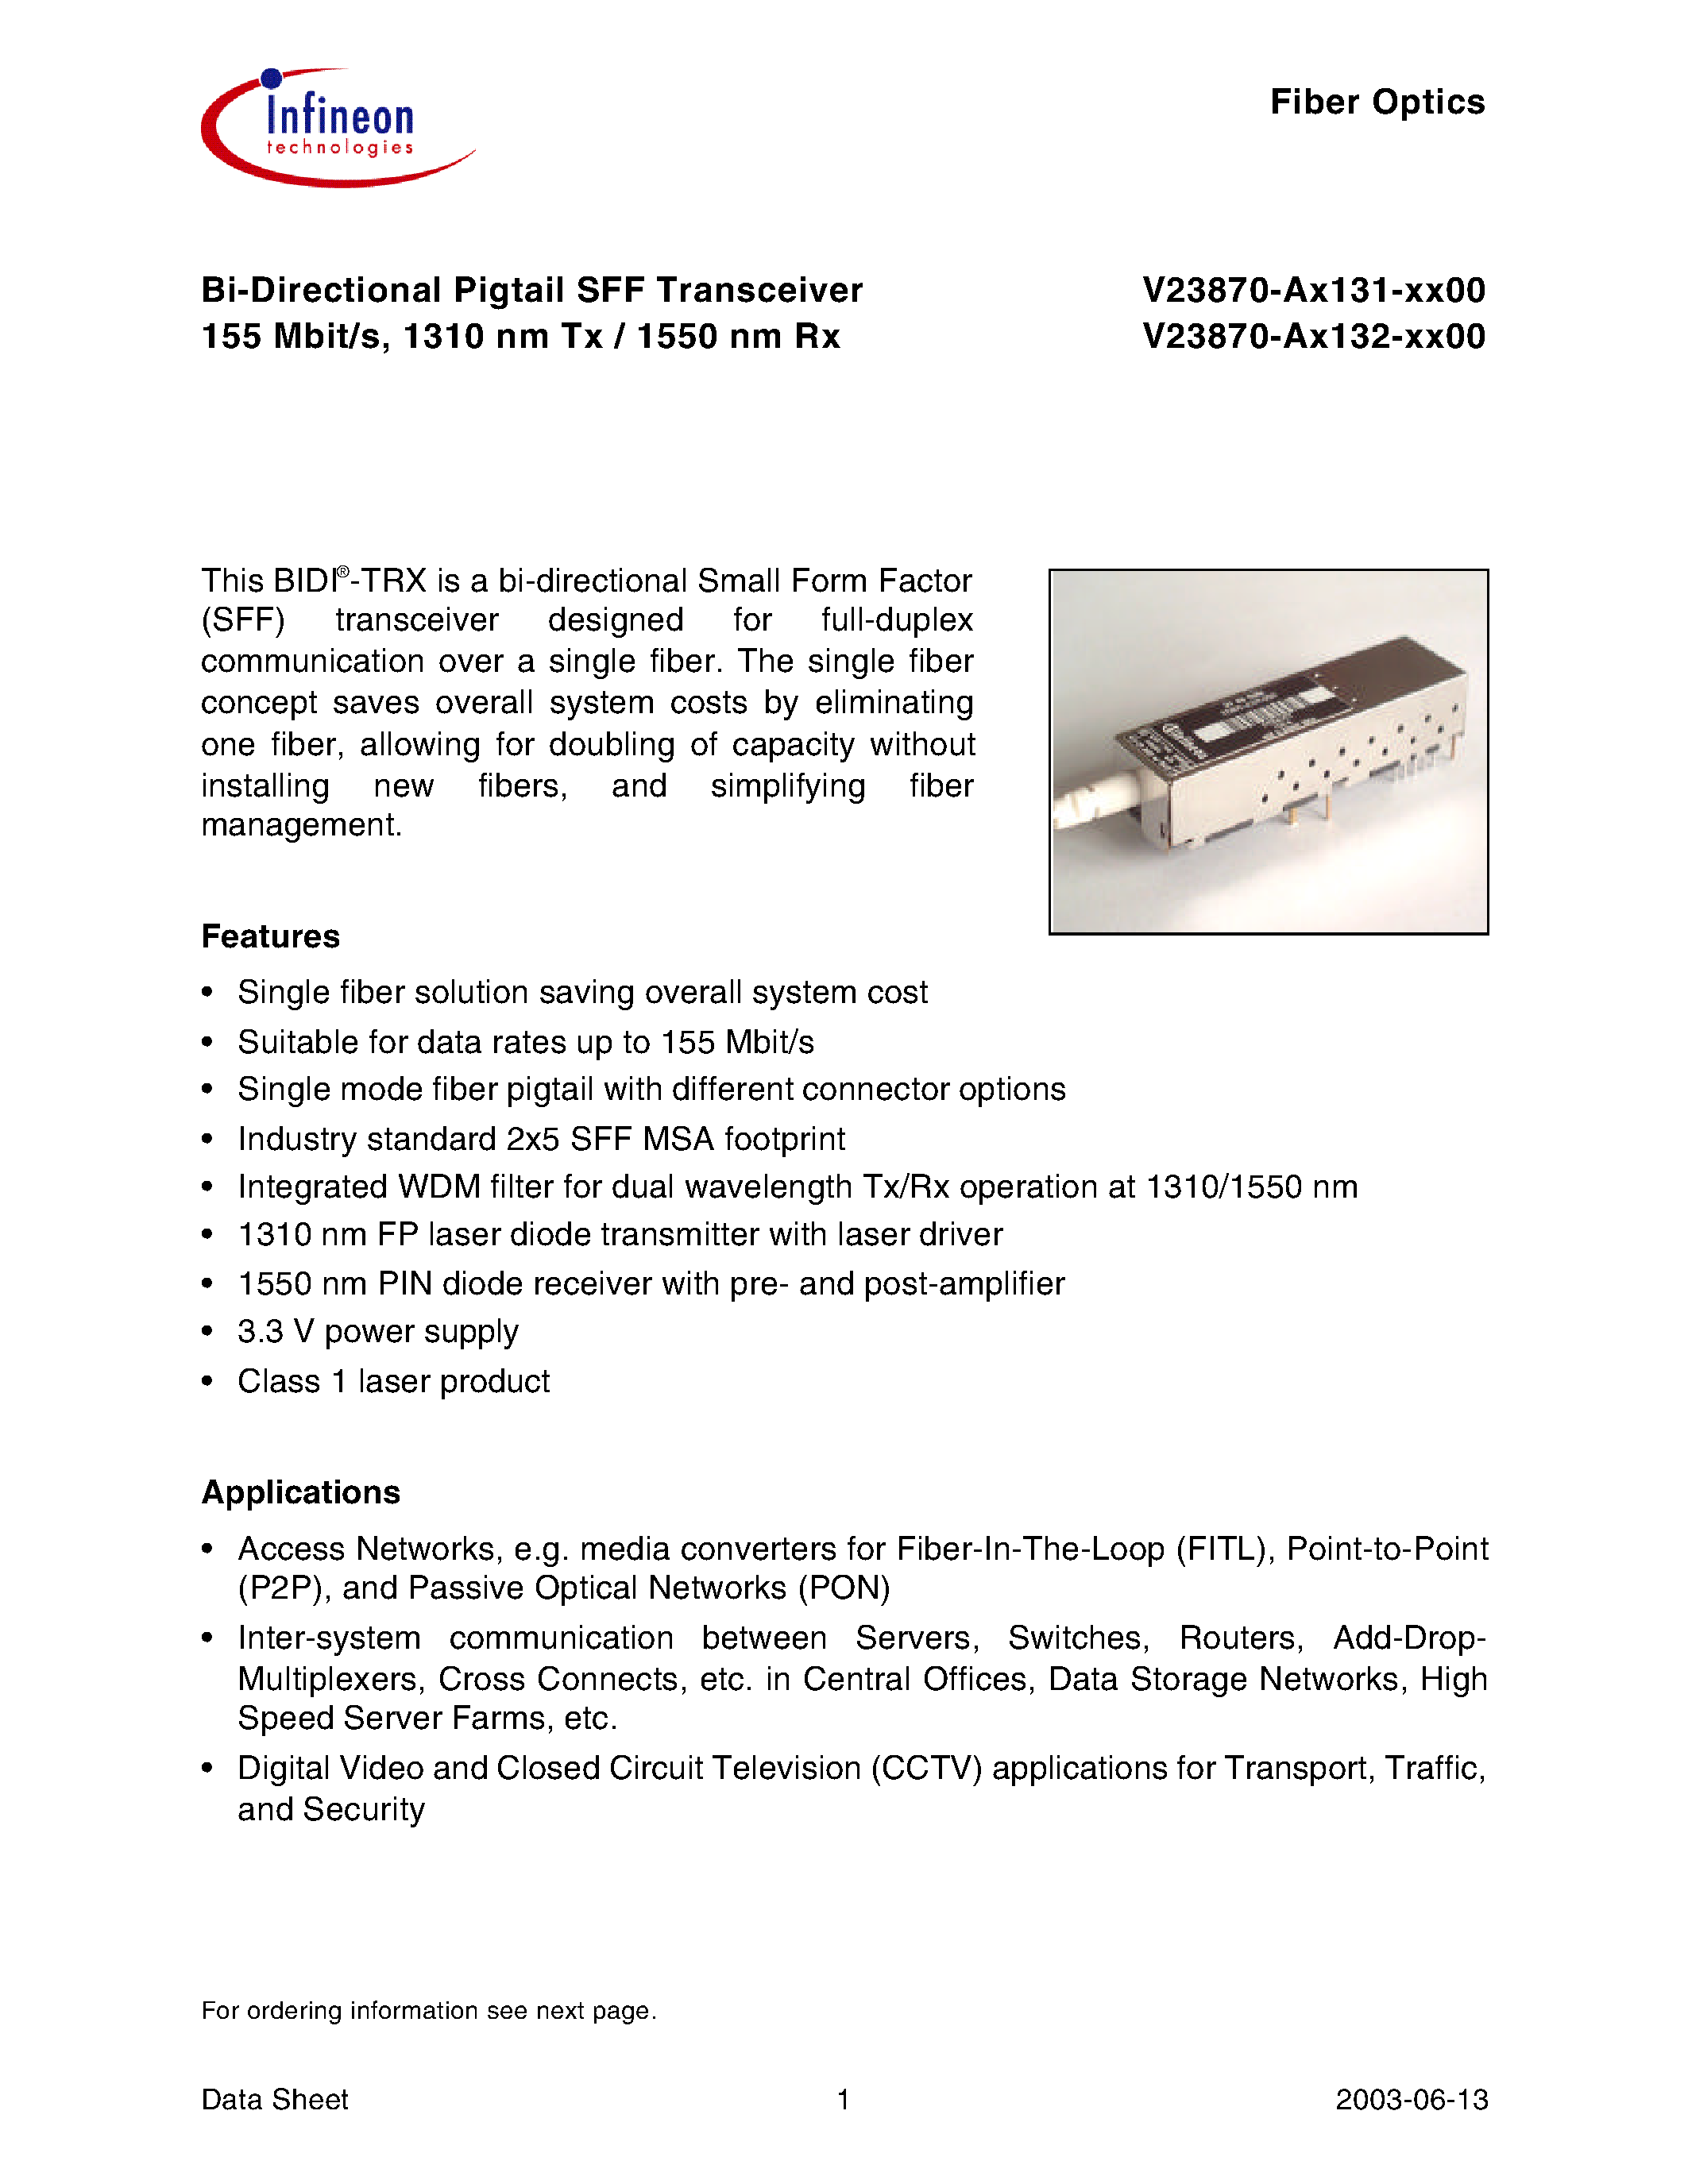 Datasheet V23870-A1131-K600 - Bi-Directional Pigtail SFF Transceiver 155 Mbit/s/ 1310 nm Tx / 1550 nm Rx page 1